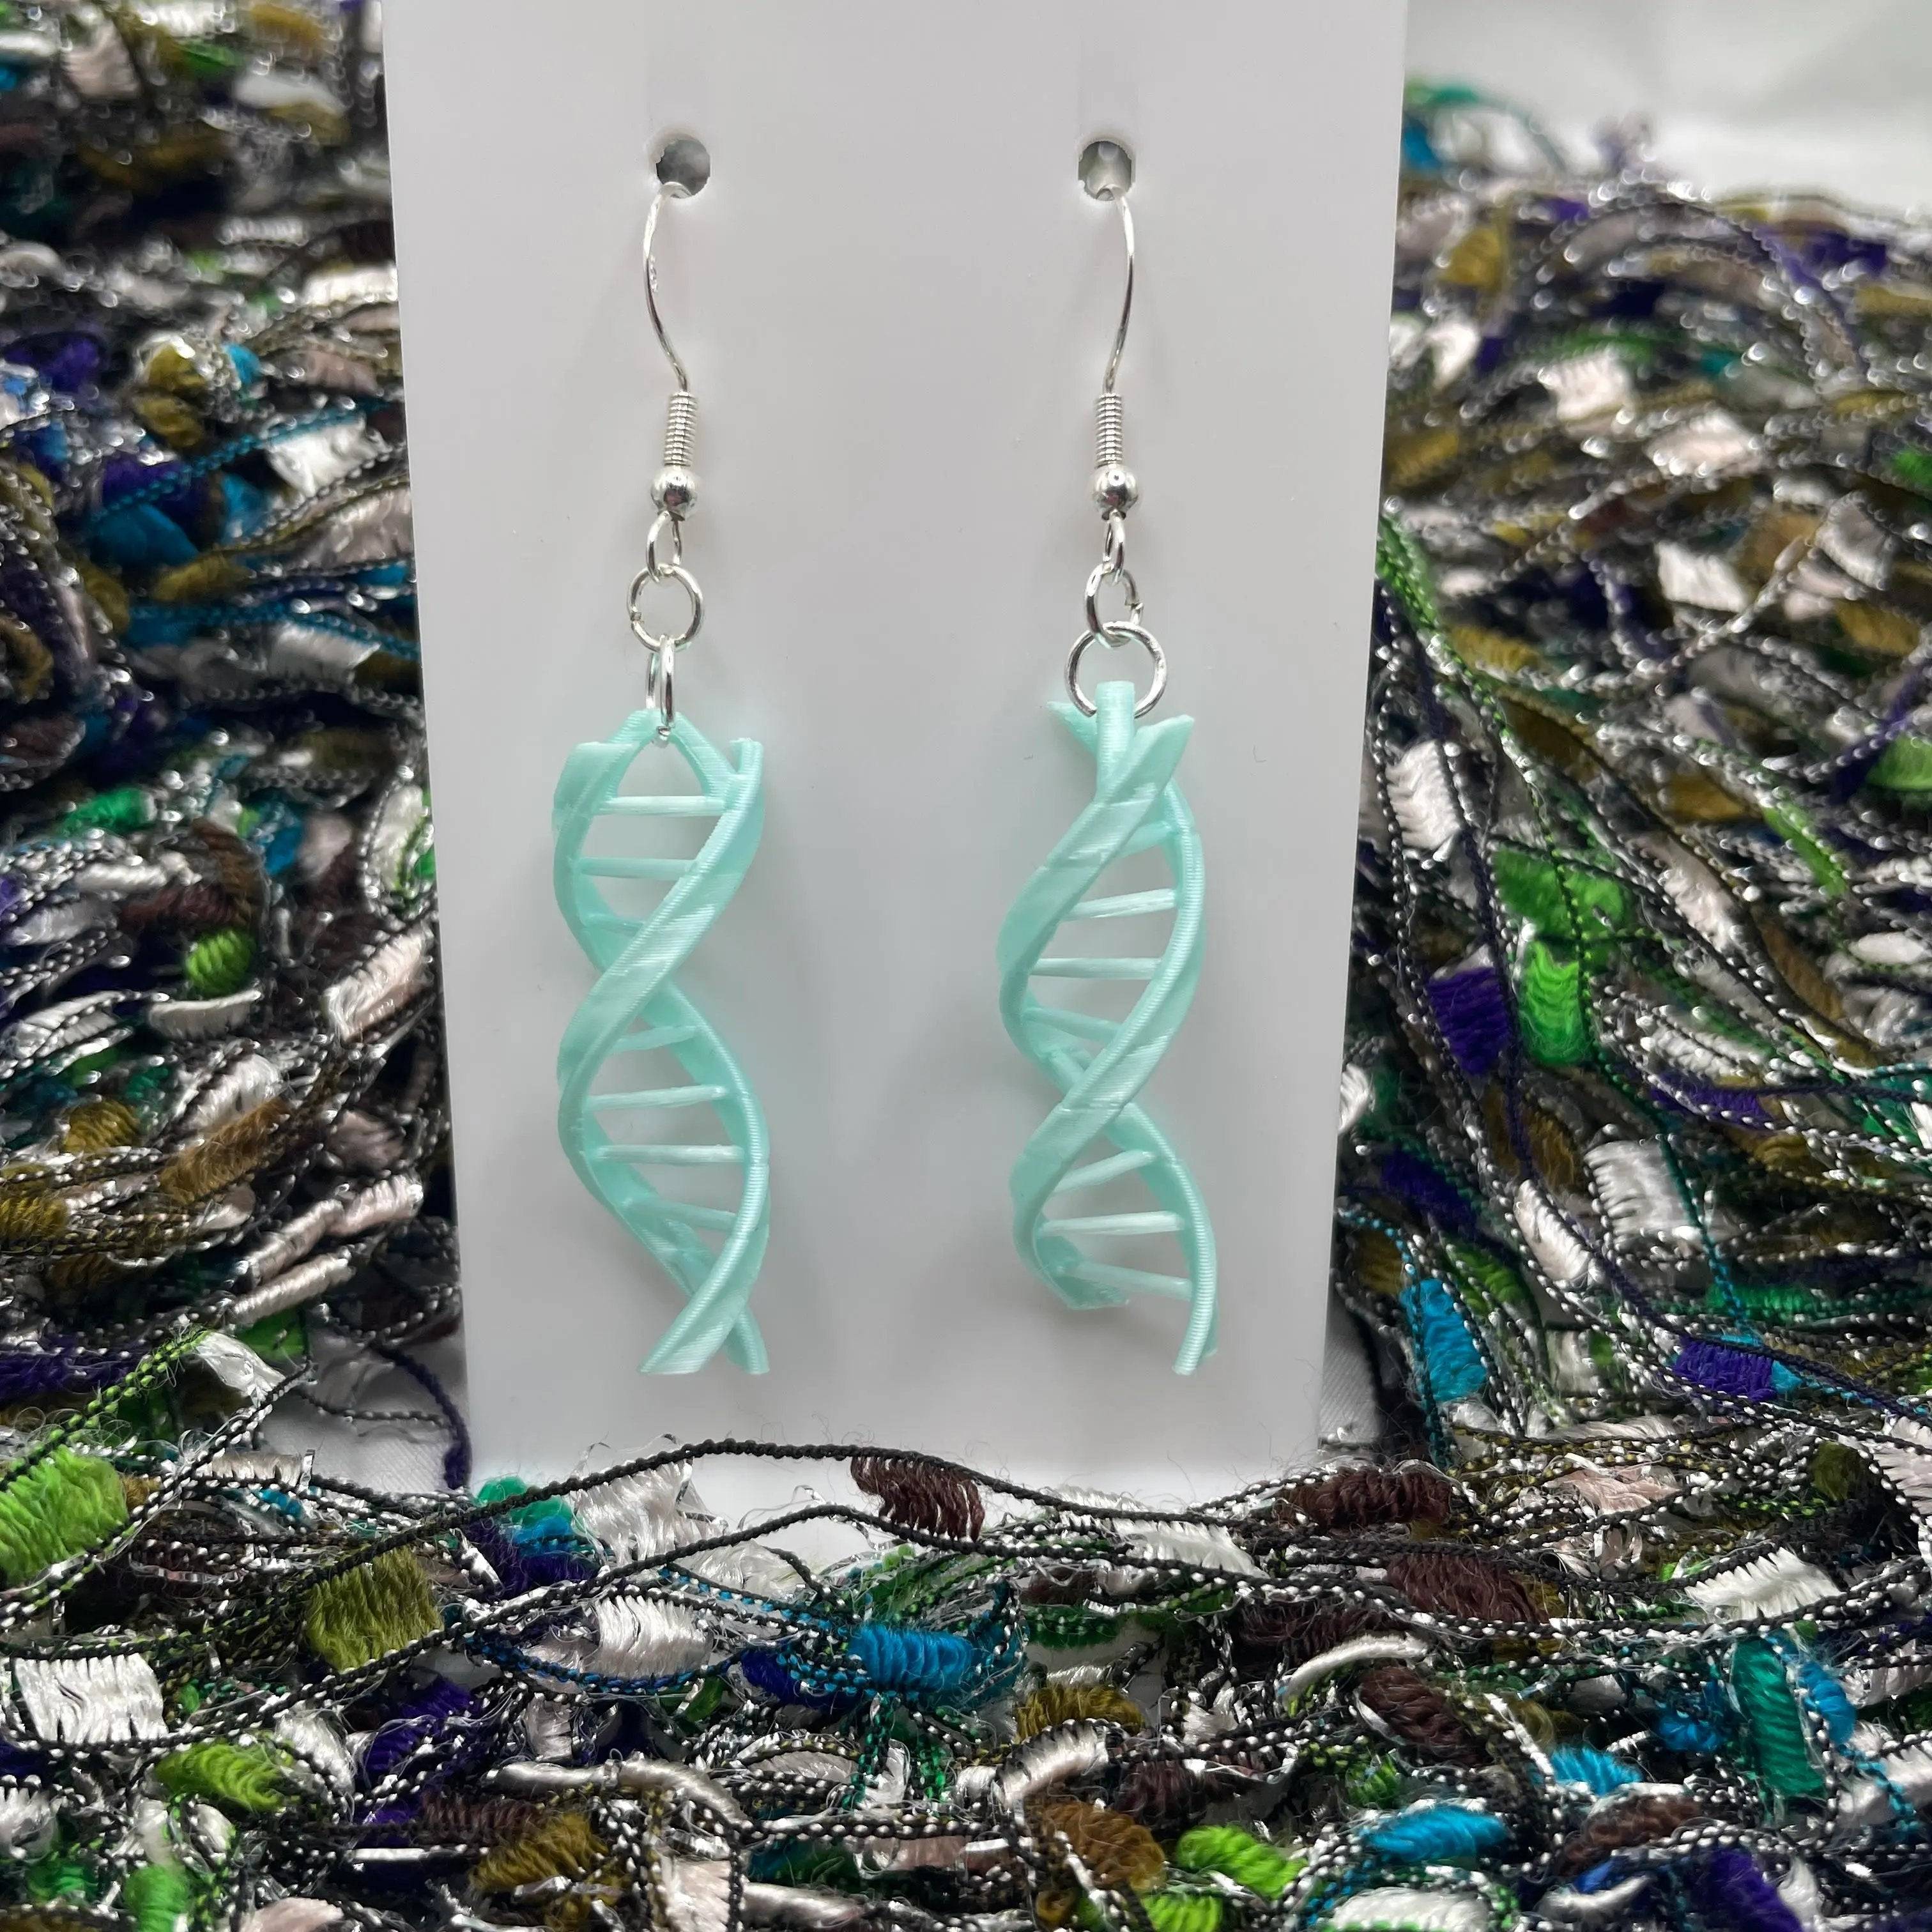 Double Helix DNA Dangle Earrings come in a light blue color.